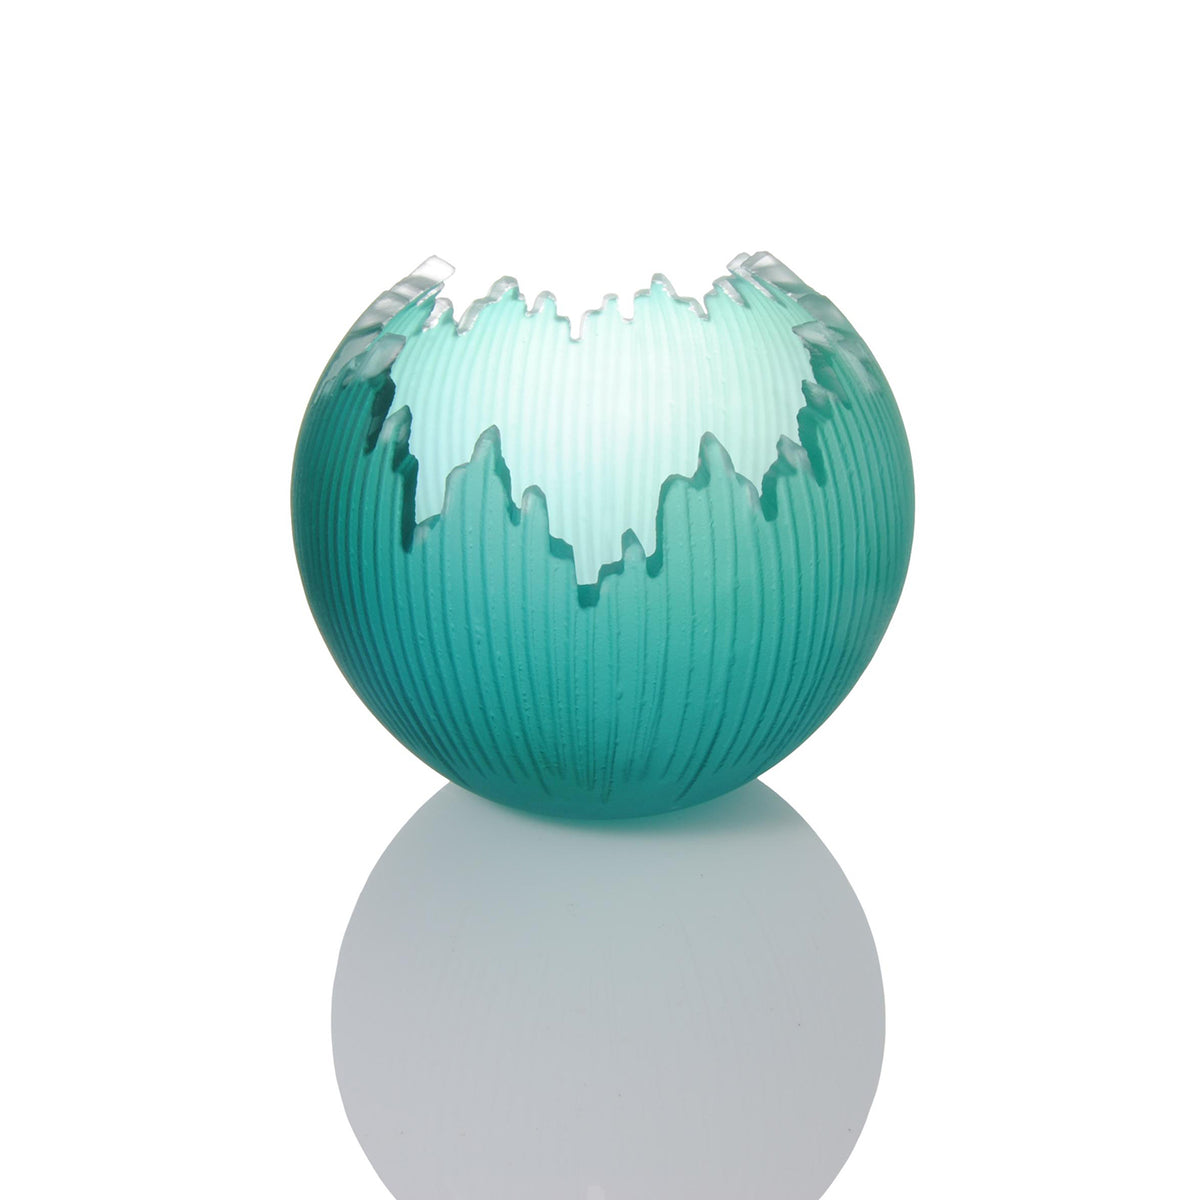 Courtney Downman - Lagoon Saw Carved Orb 7.5"